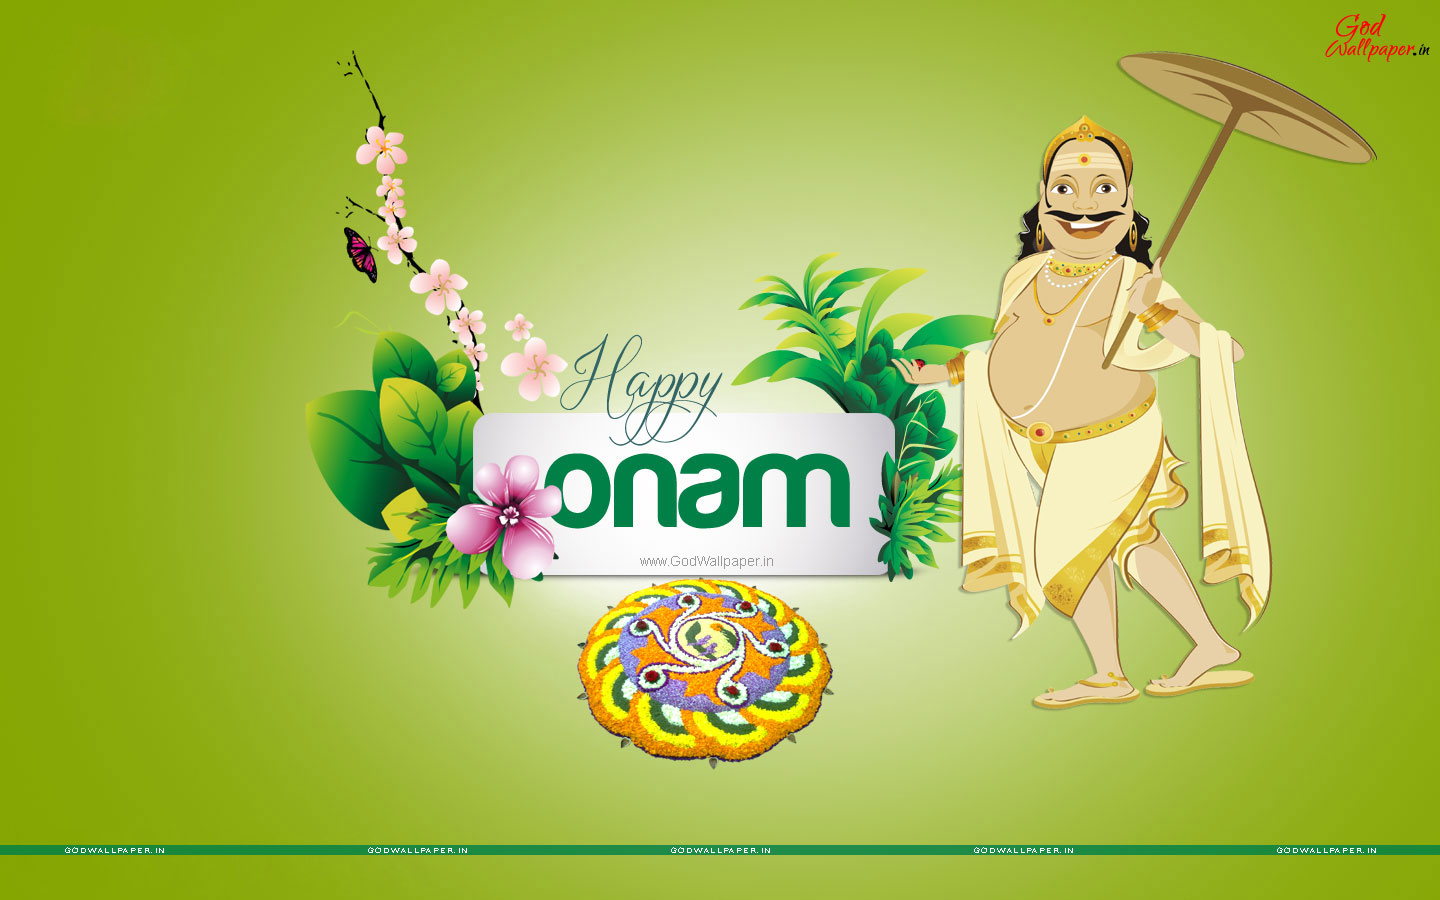 Onam Live Wallpapers & Images Free Download